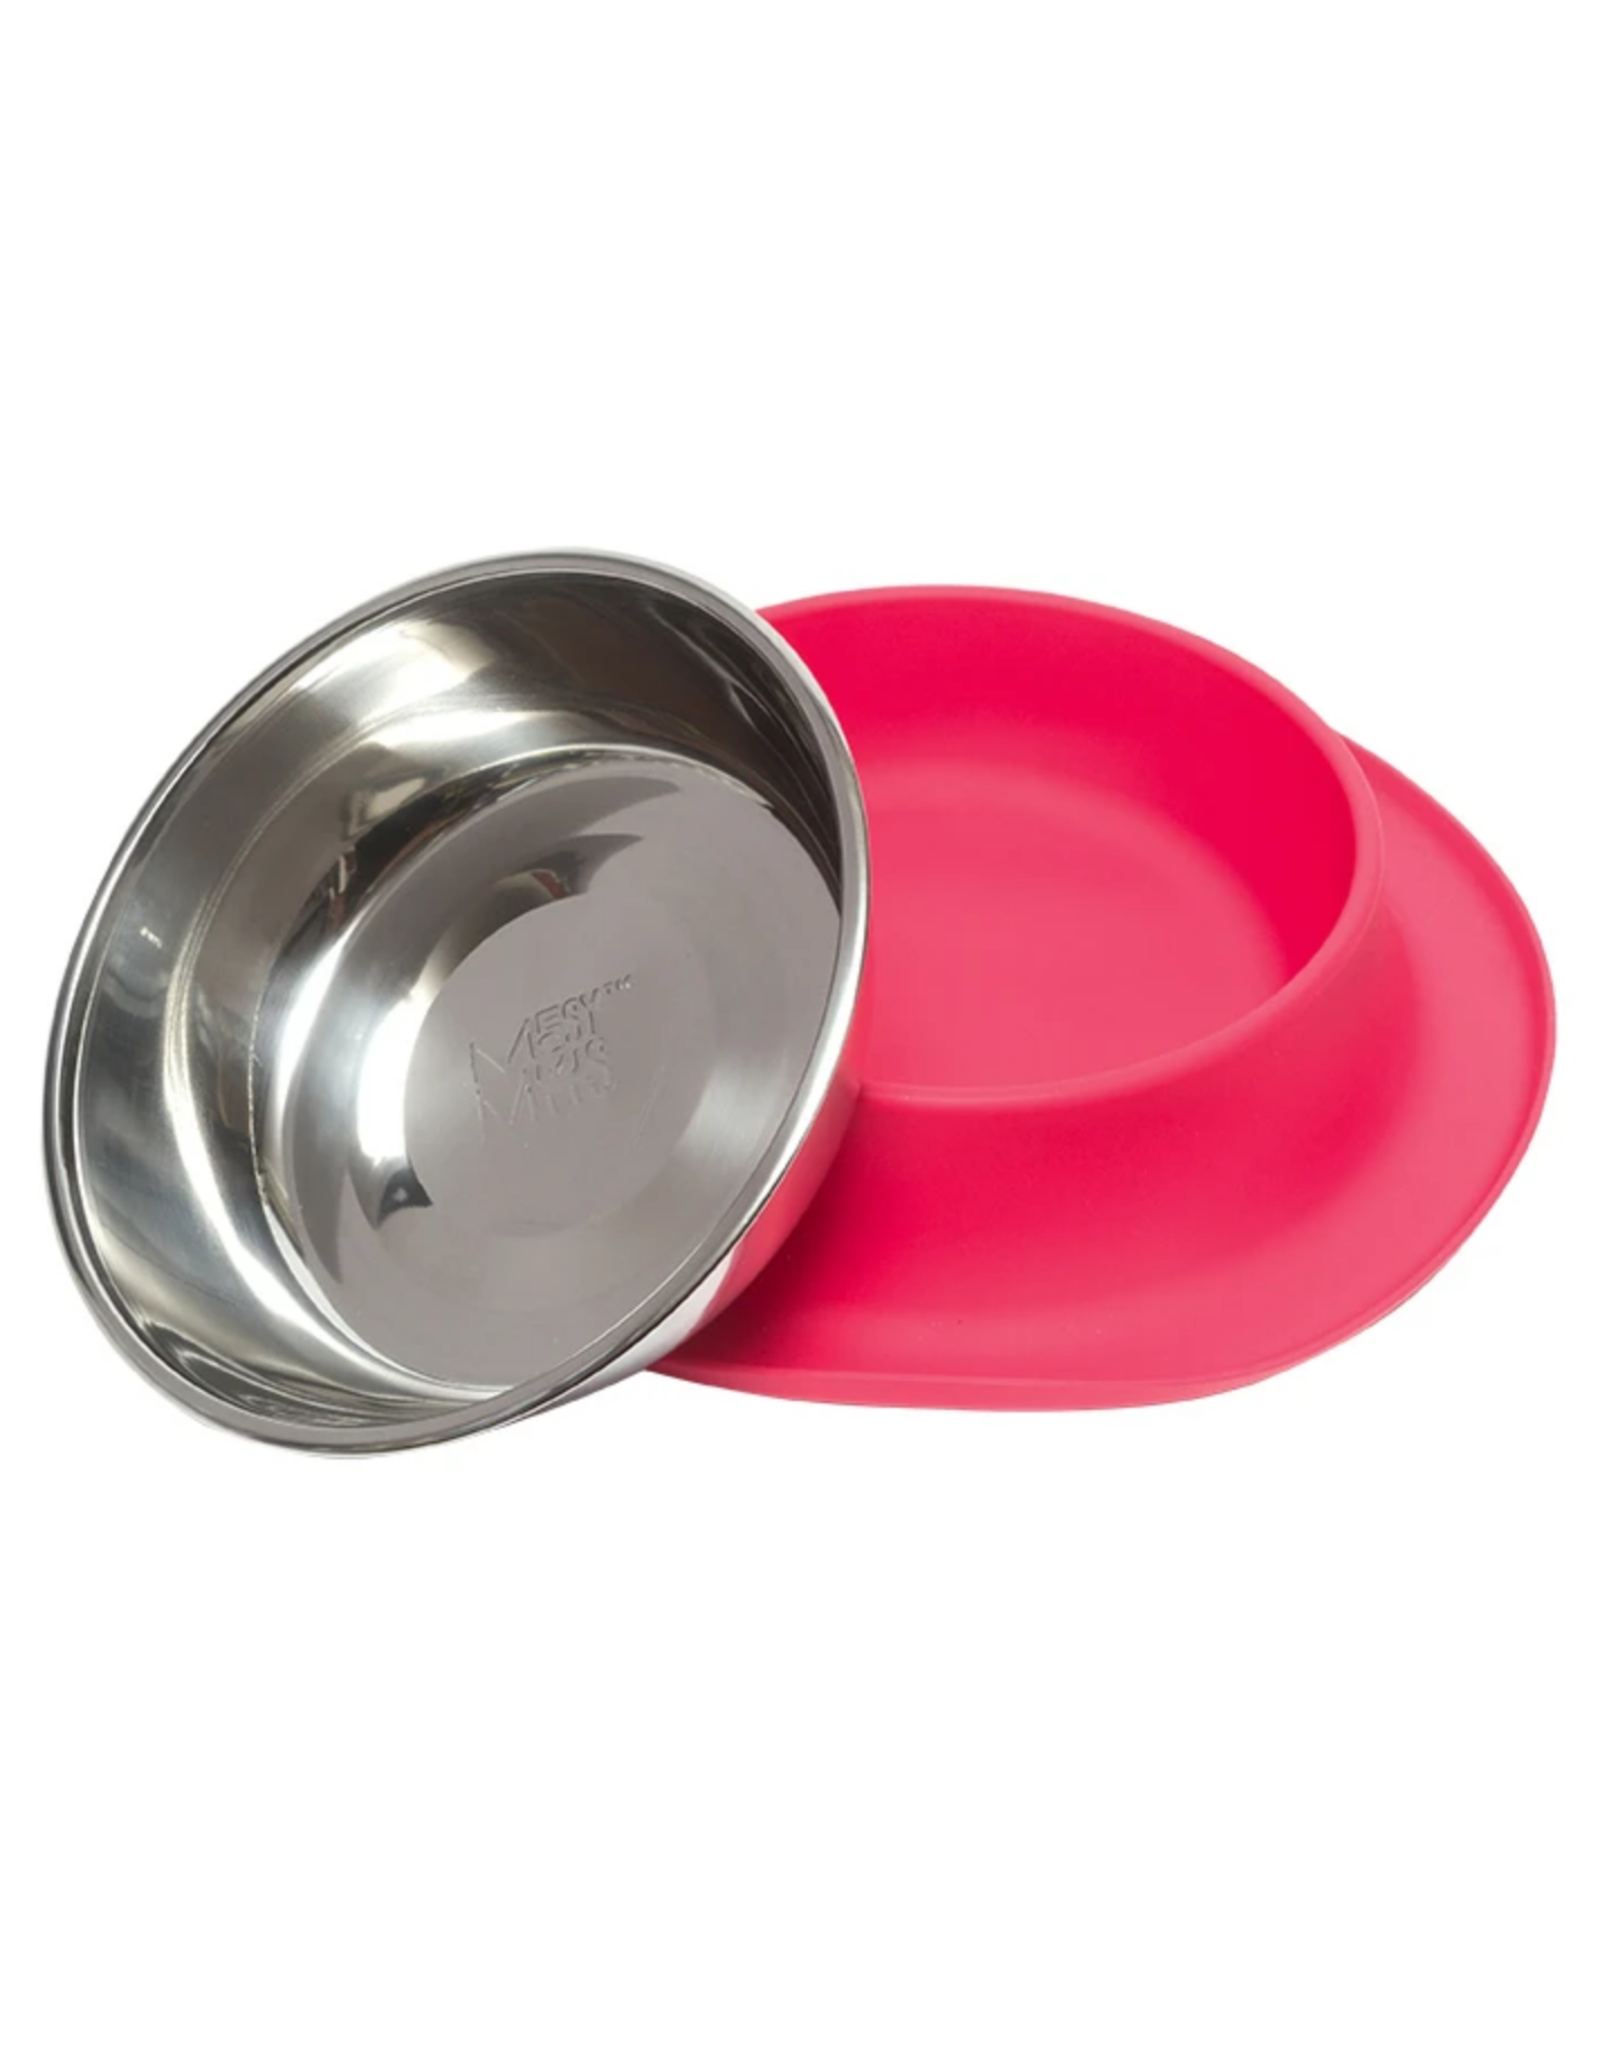 Messy Mutts Messy Mutts Single Silicone Feeder with Stainless Steel Bowl